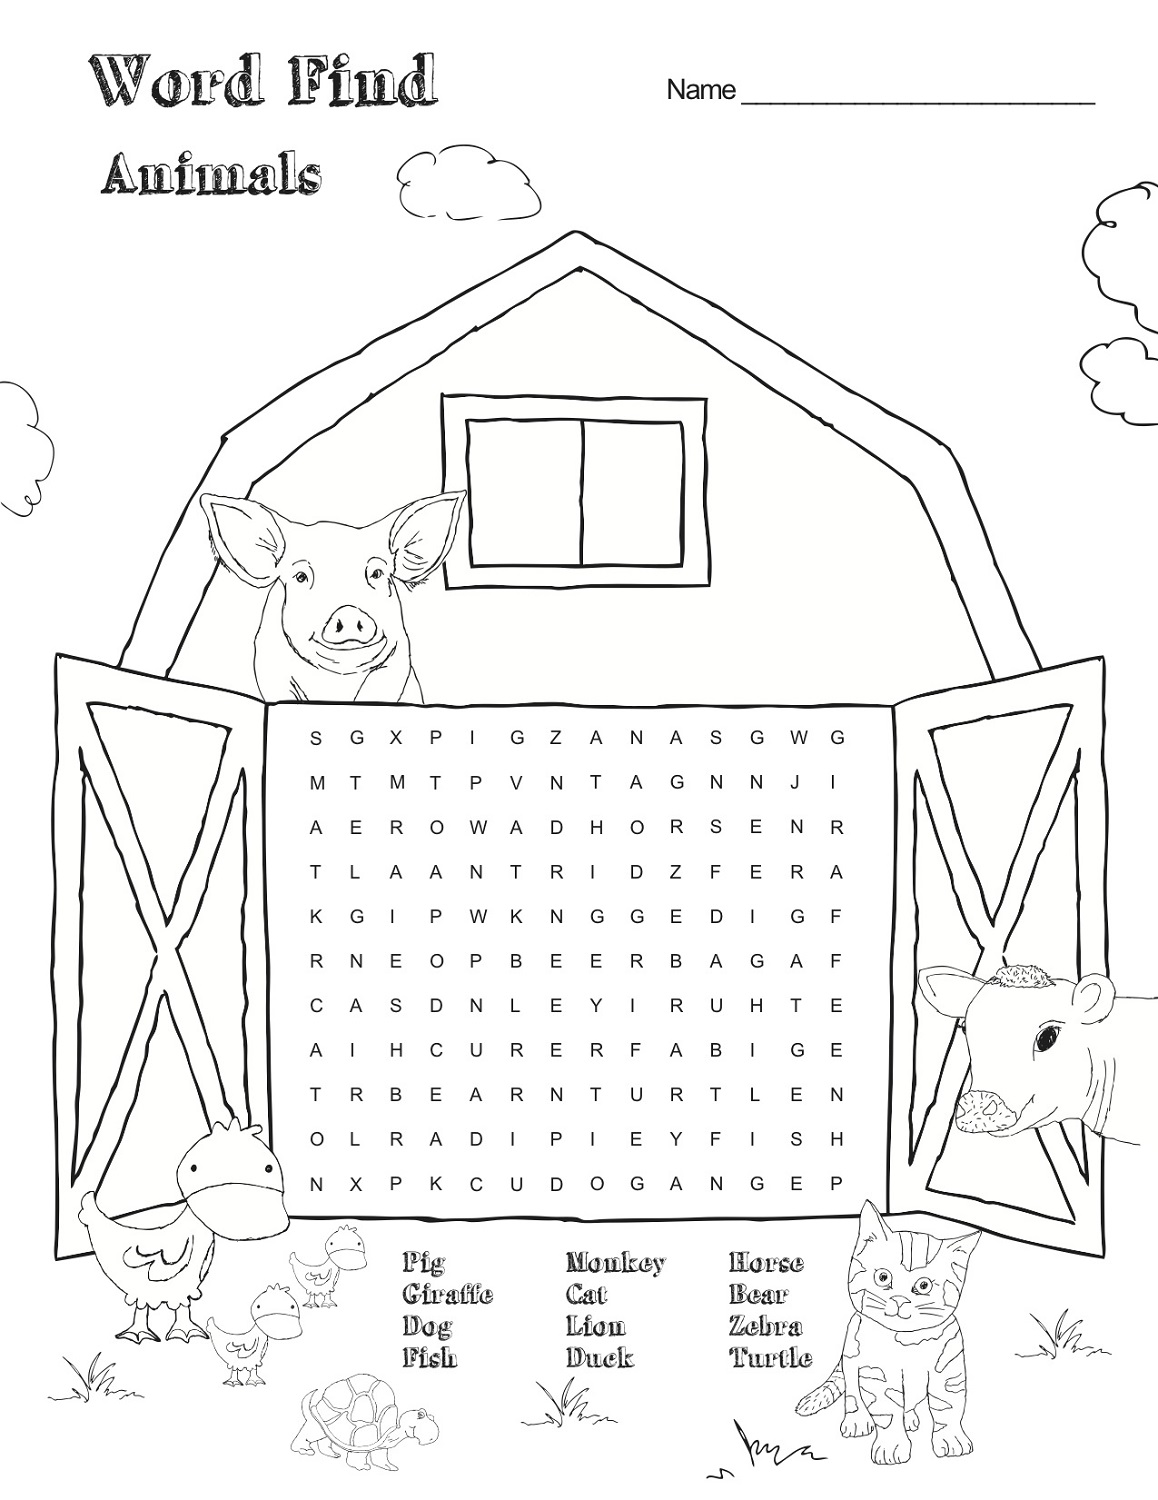 animal-farm-word-search-for-kids